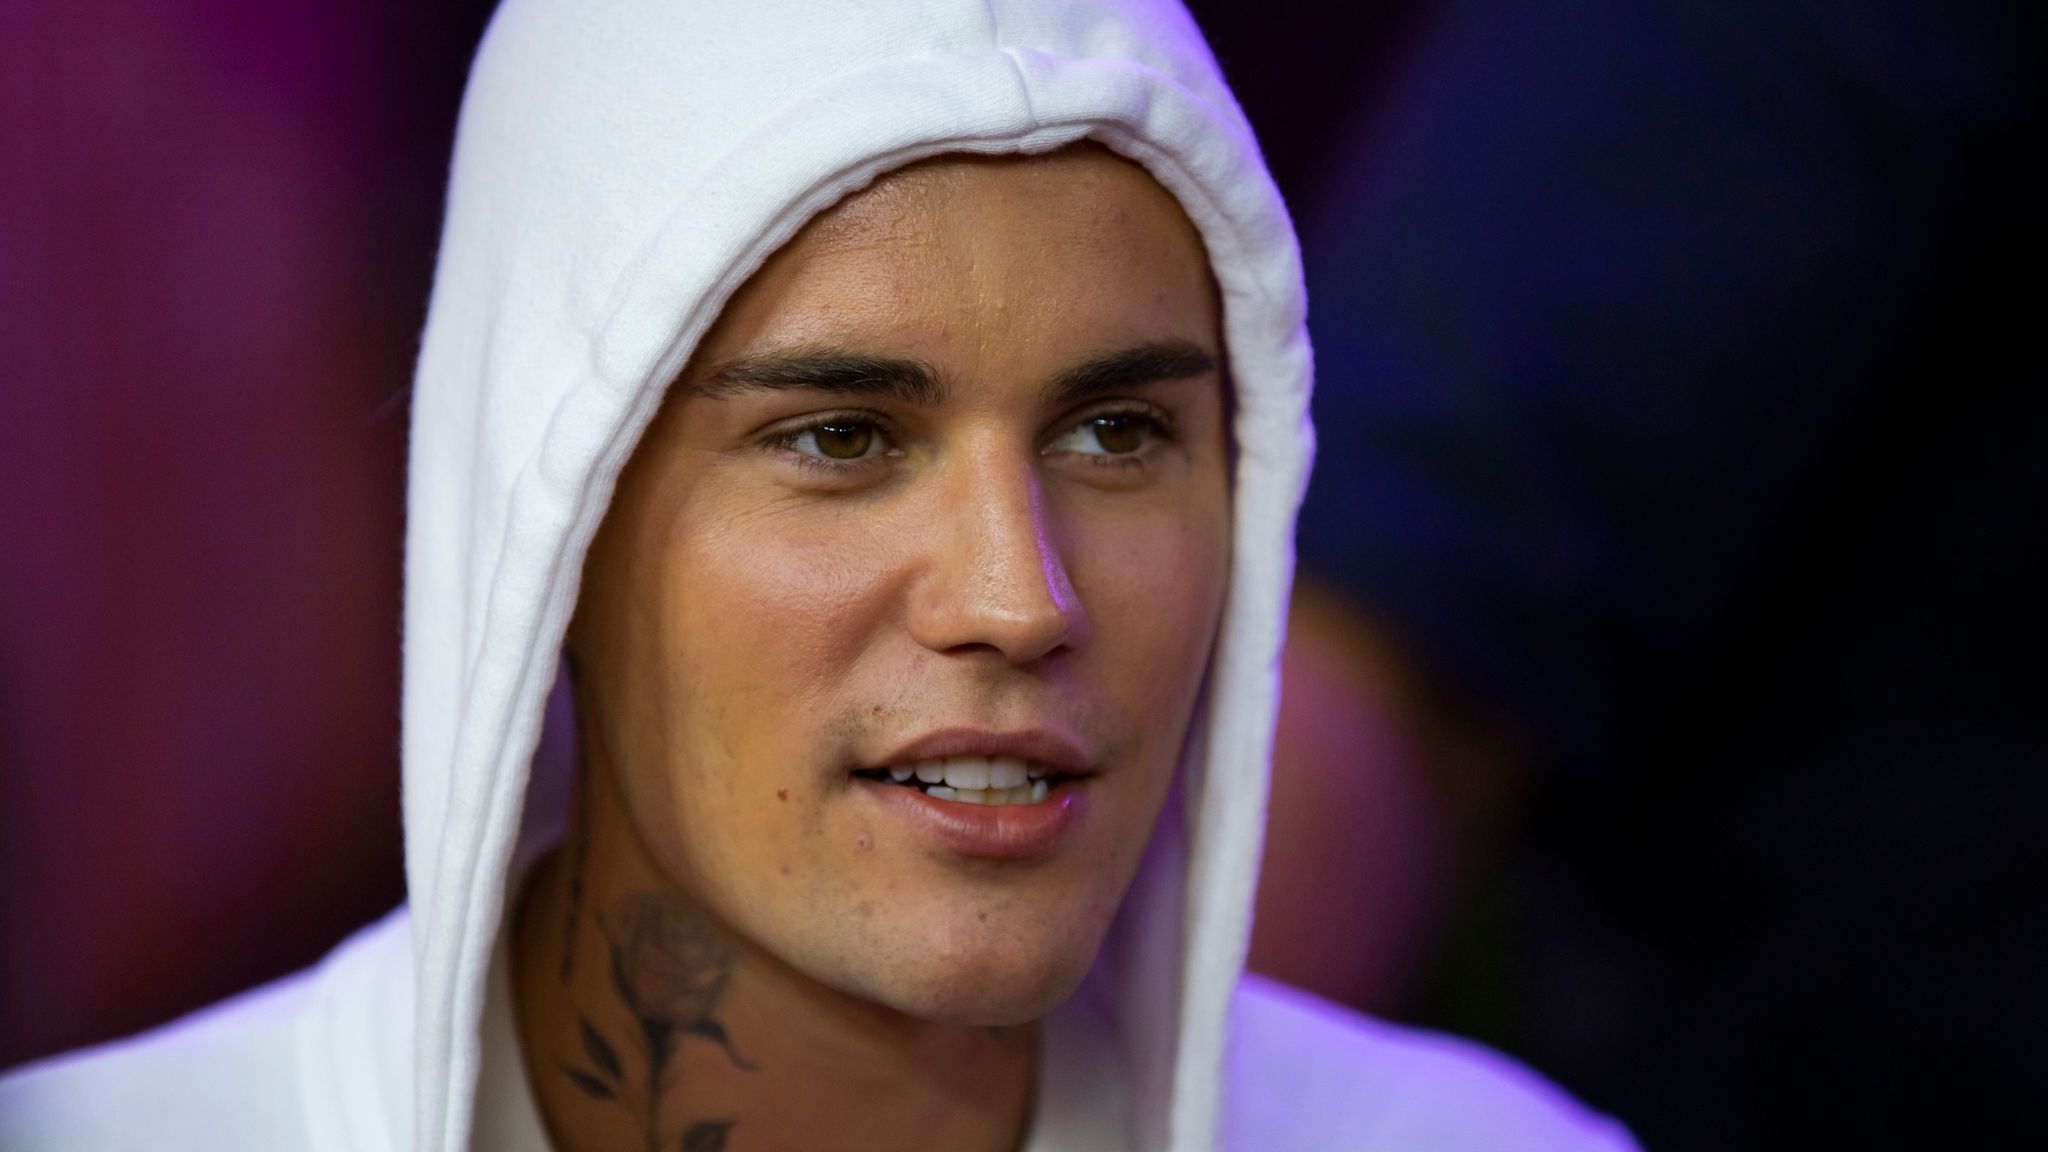 Justin Bieber has just earned £162m - but there's a pretty big catch